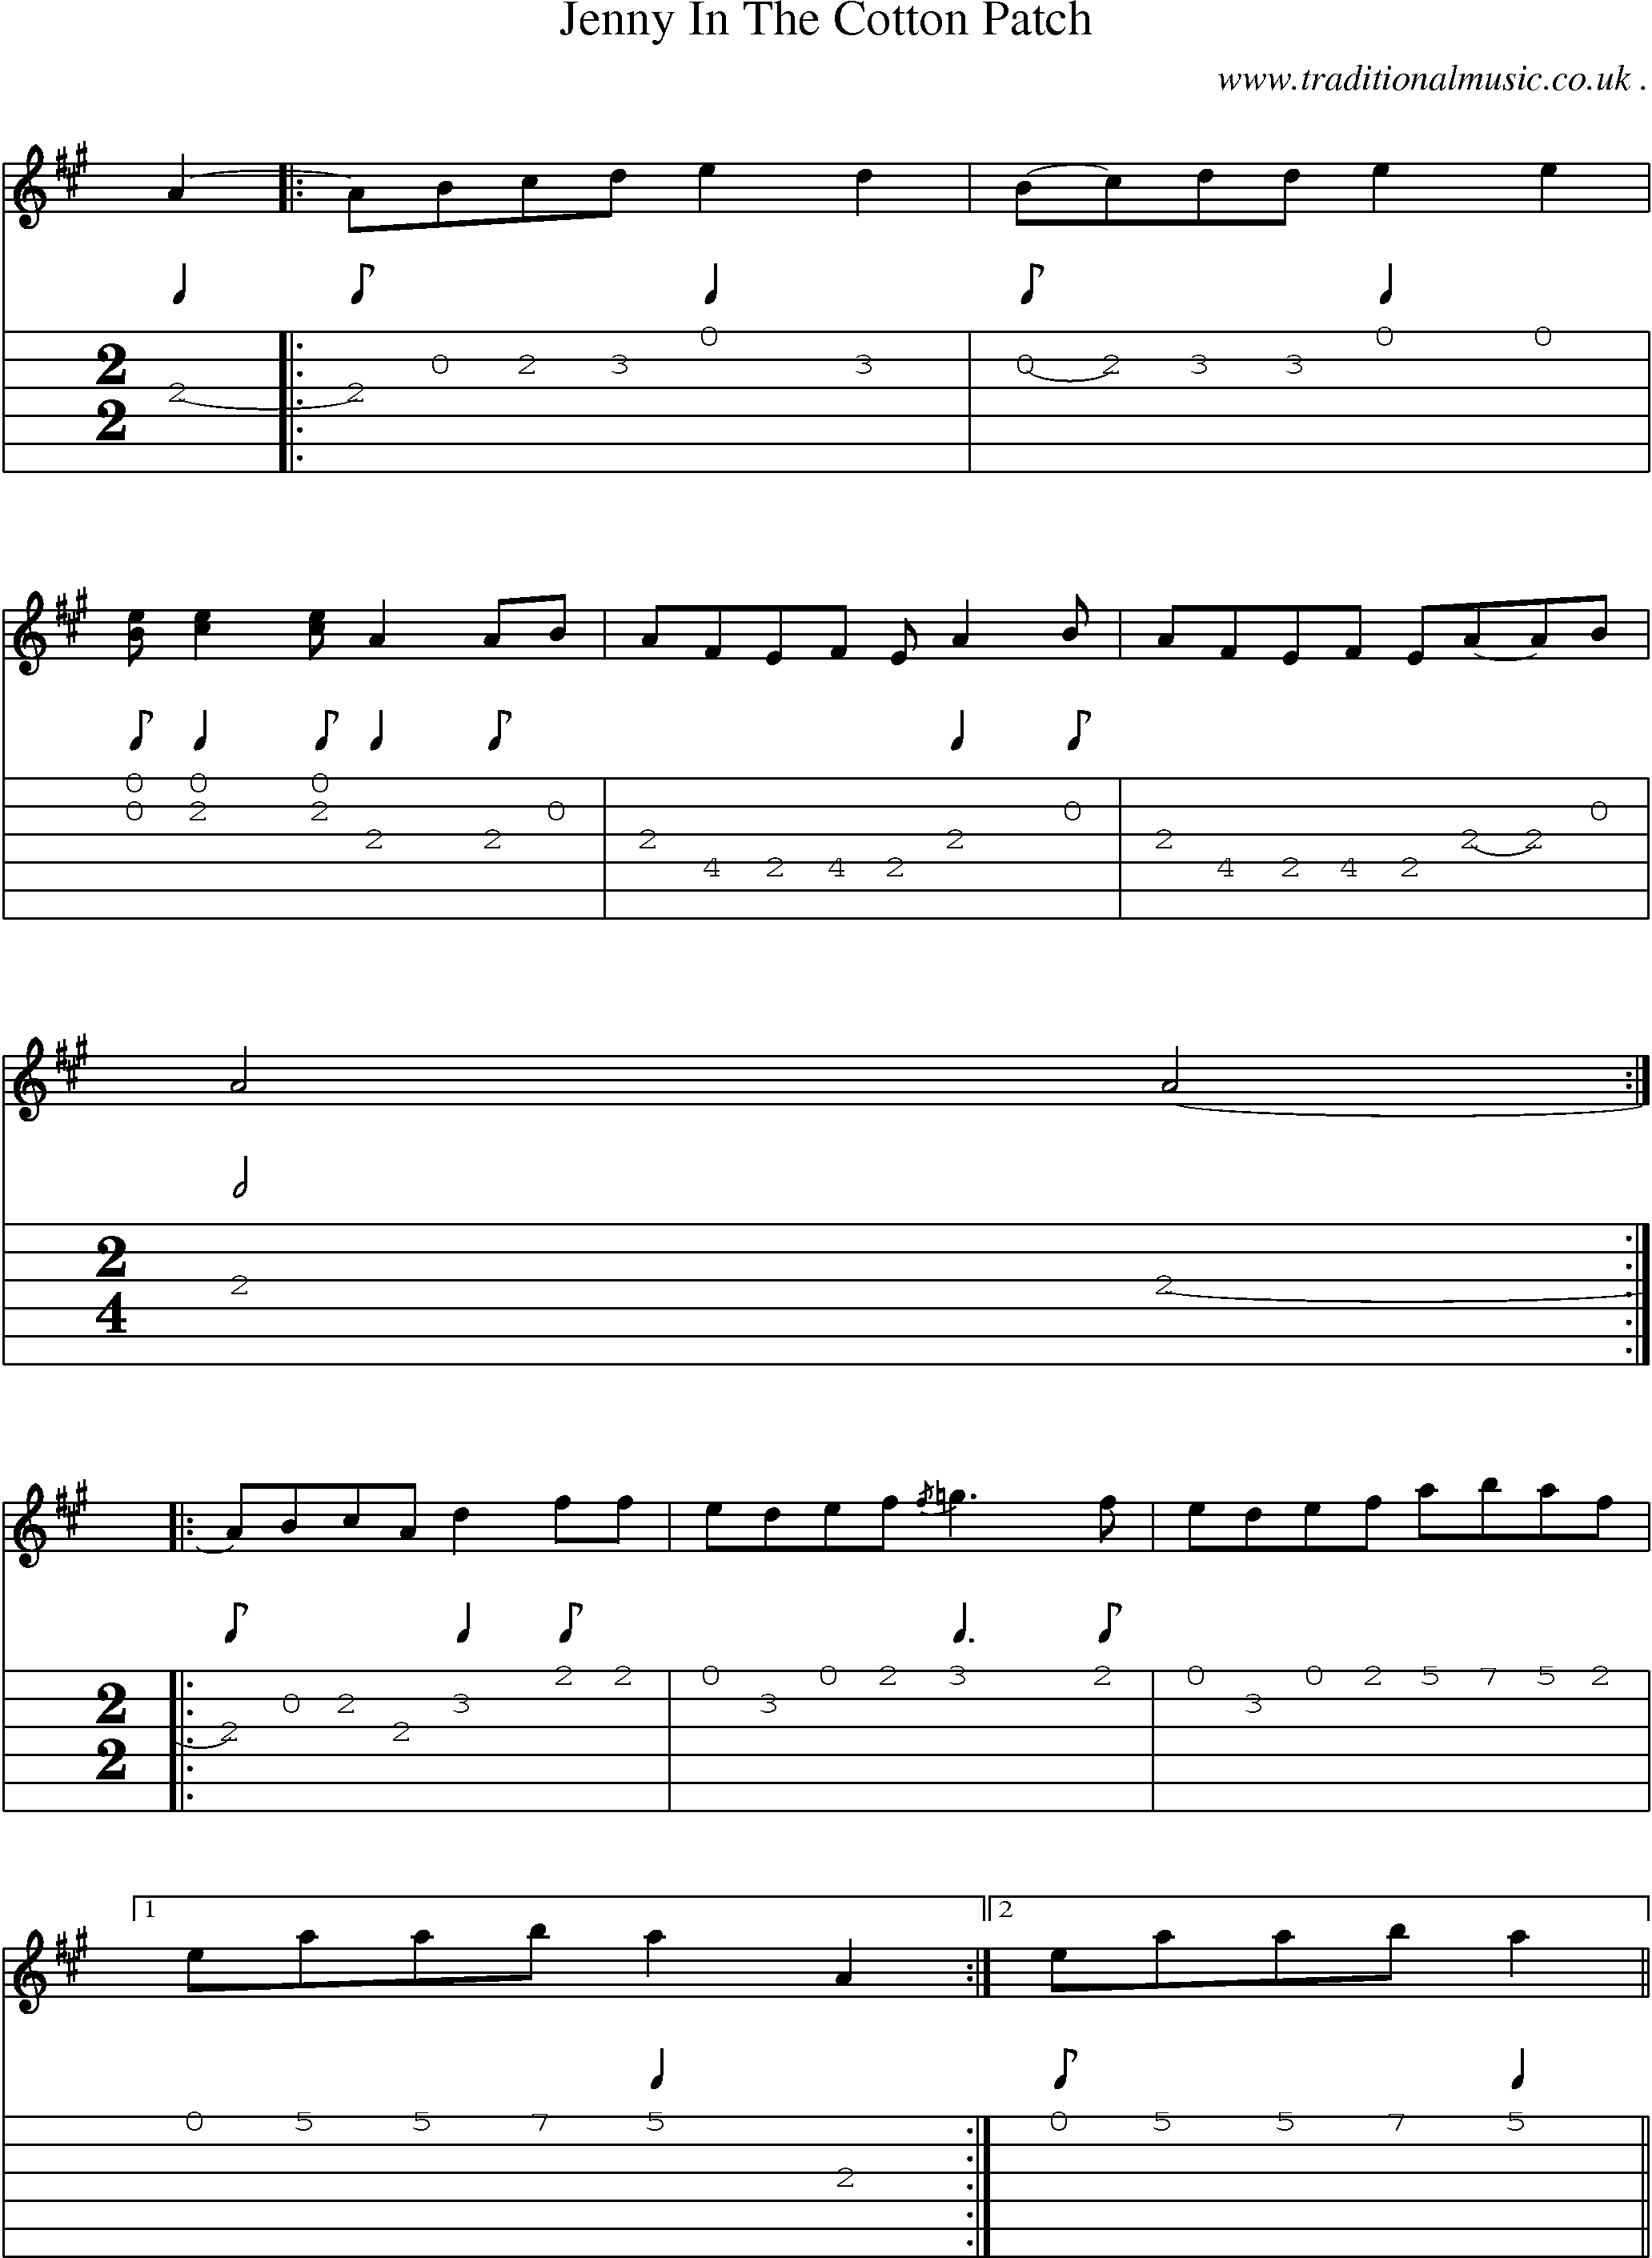 Music Score and Guitar Tabs for Jenny In The Cotton Patch